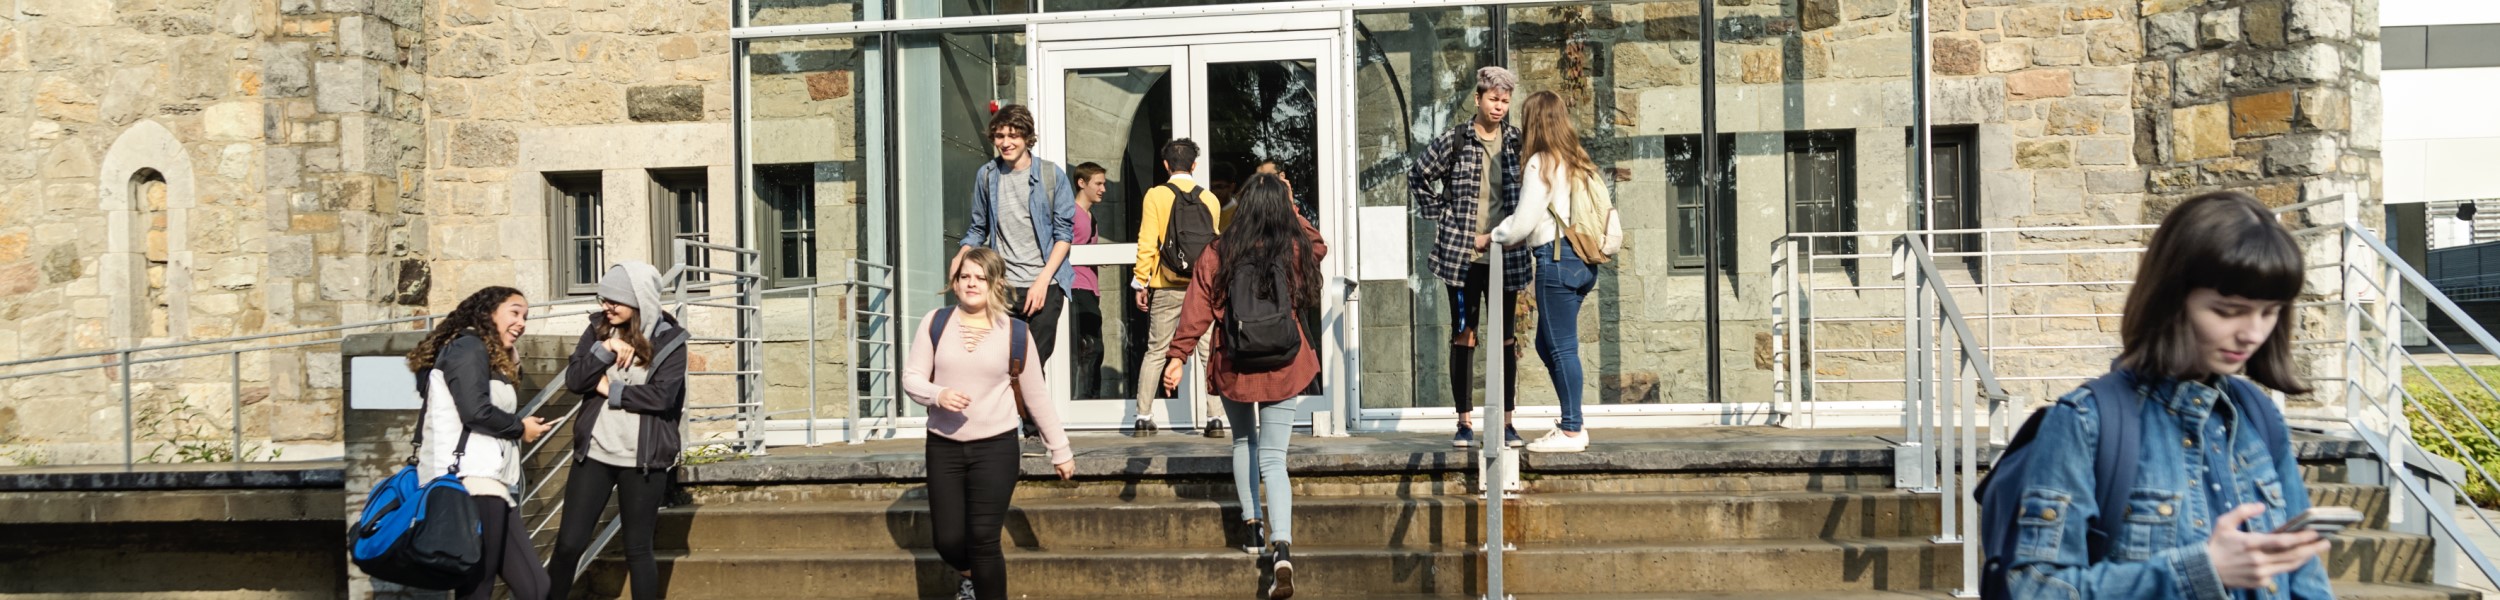 Higher ed building with students coming and going_banner-1